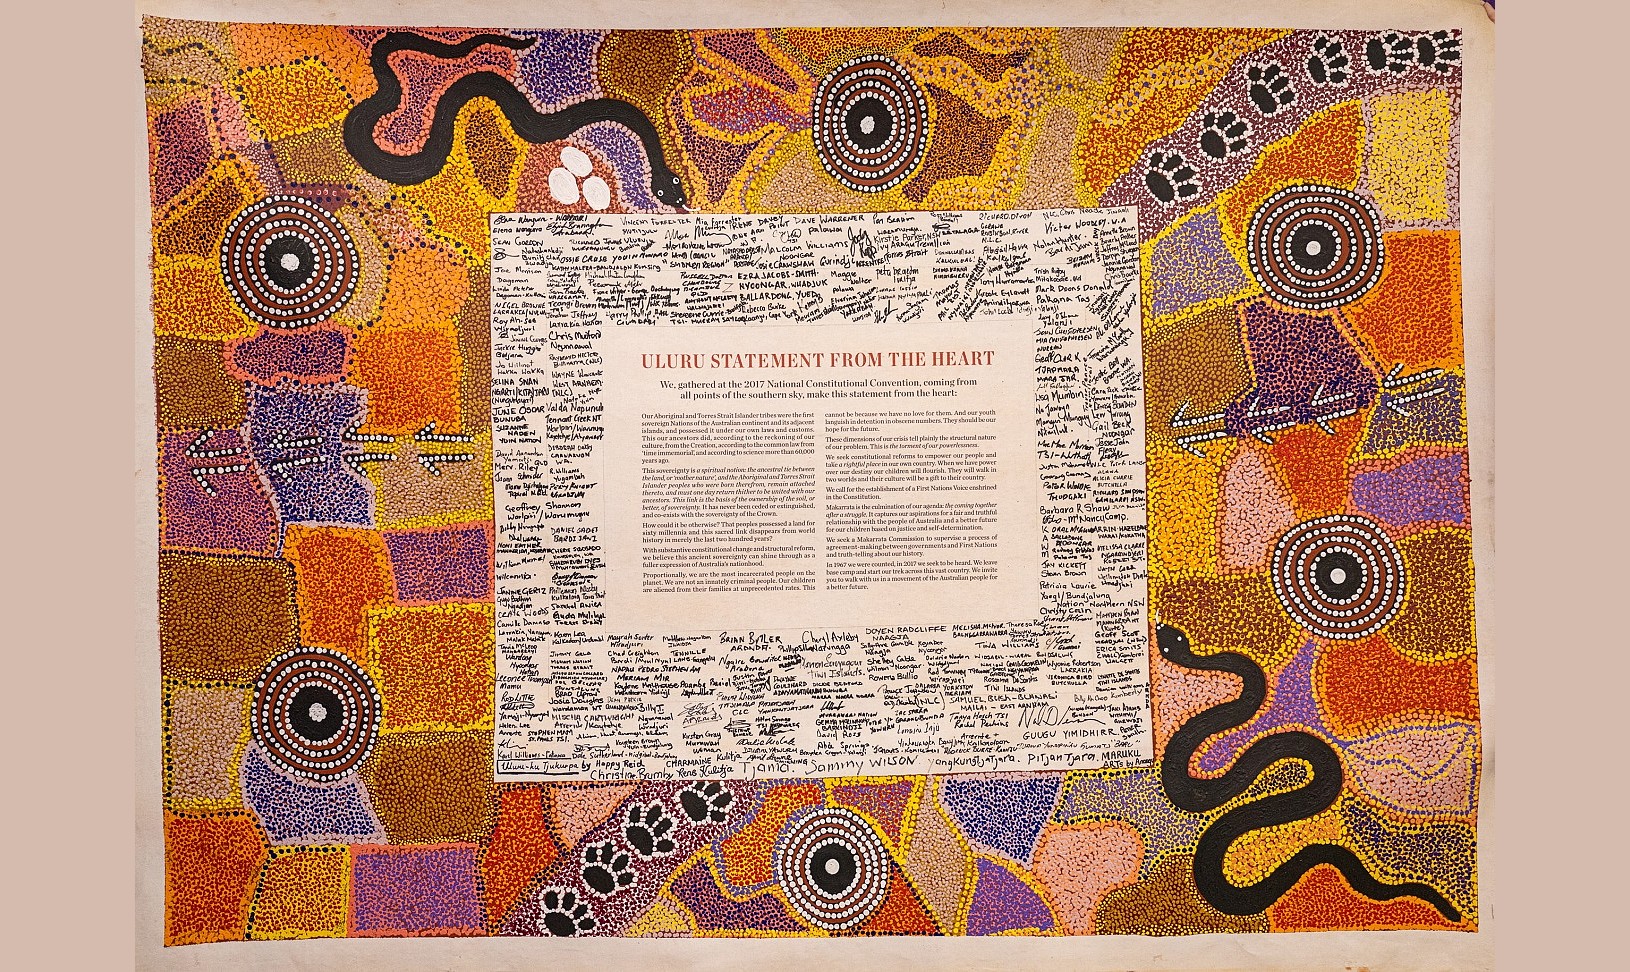 Uluru Statement from the Heart with text, signatures and artwork